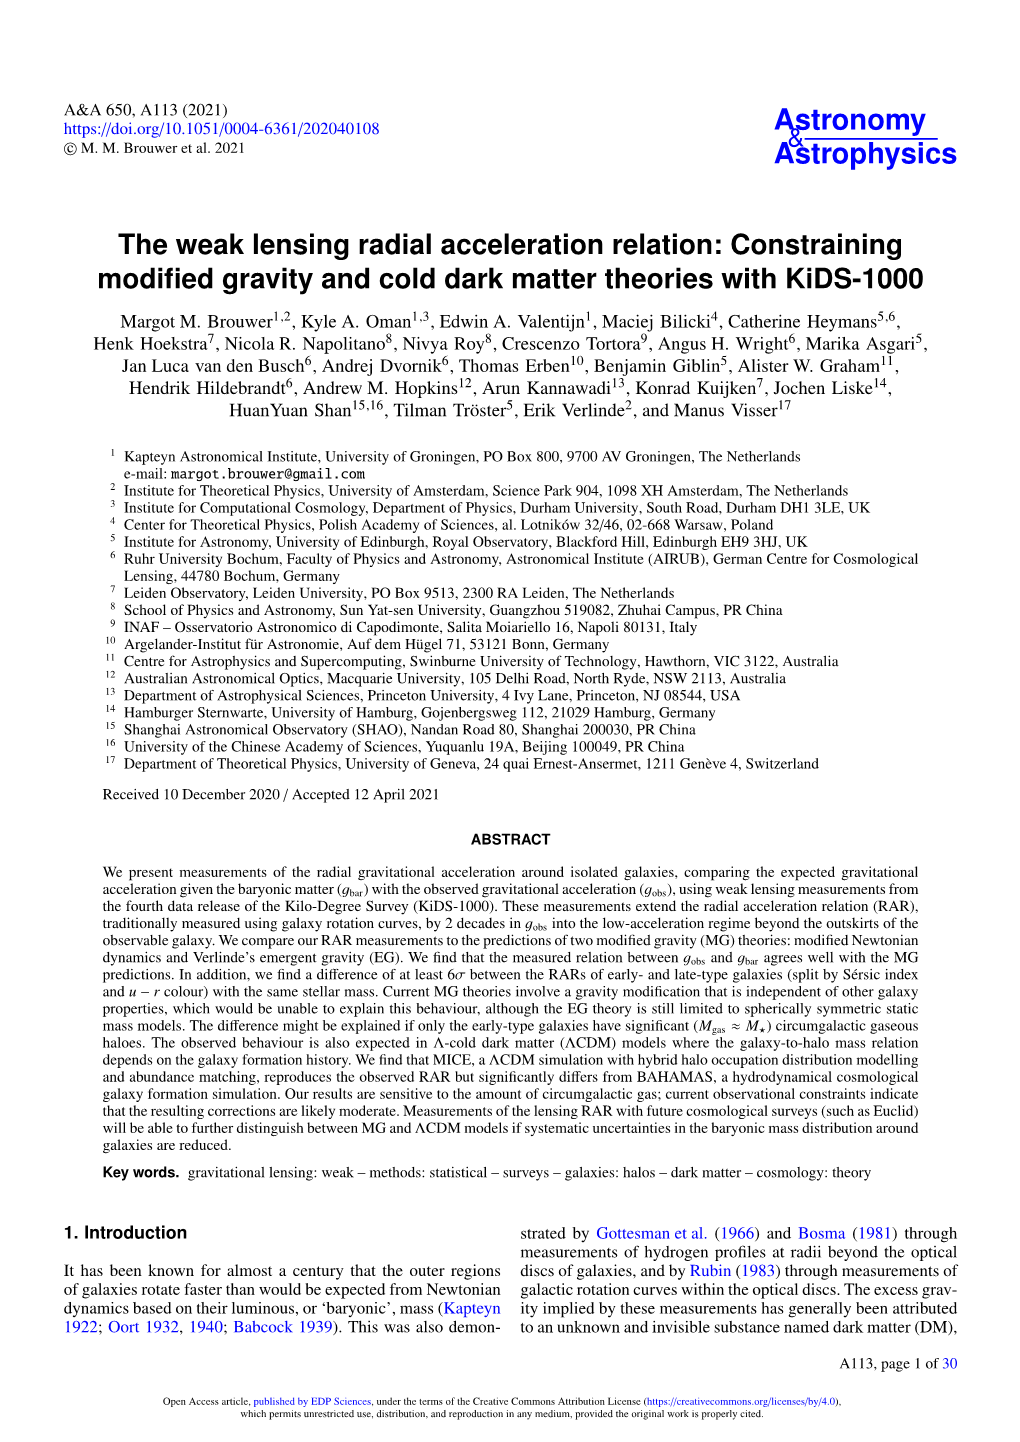 The Weak Lensing Radial Acceleration Relation: Constraining Modified